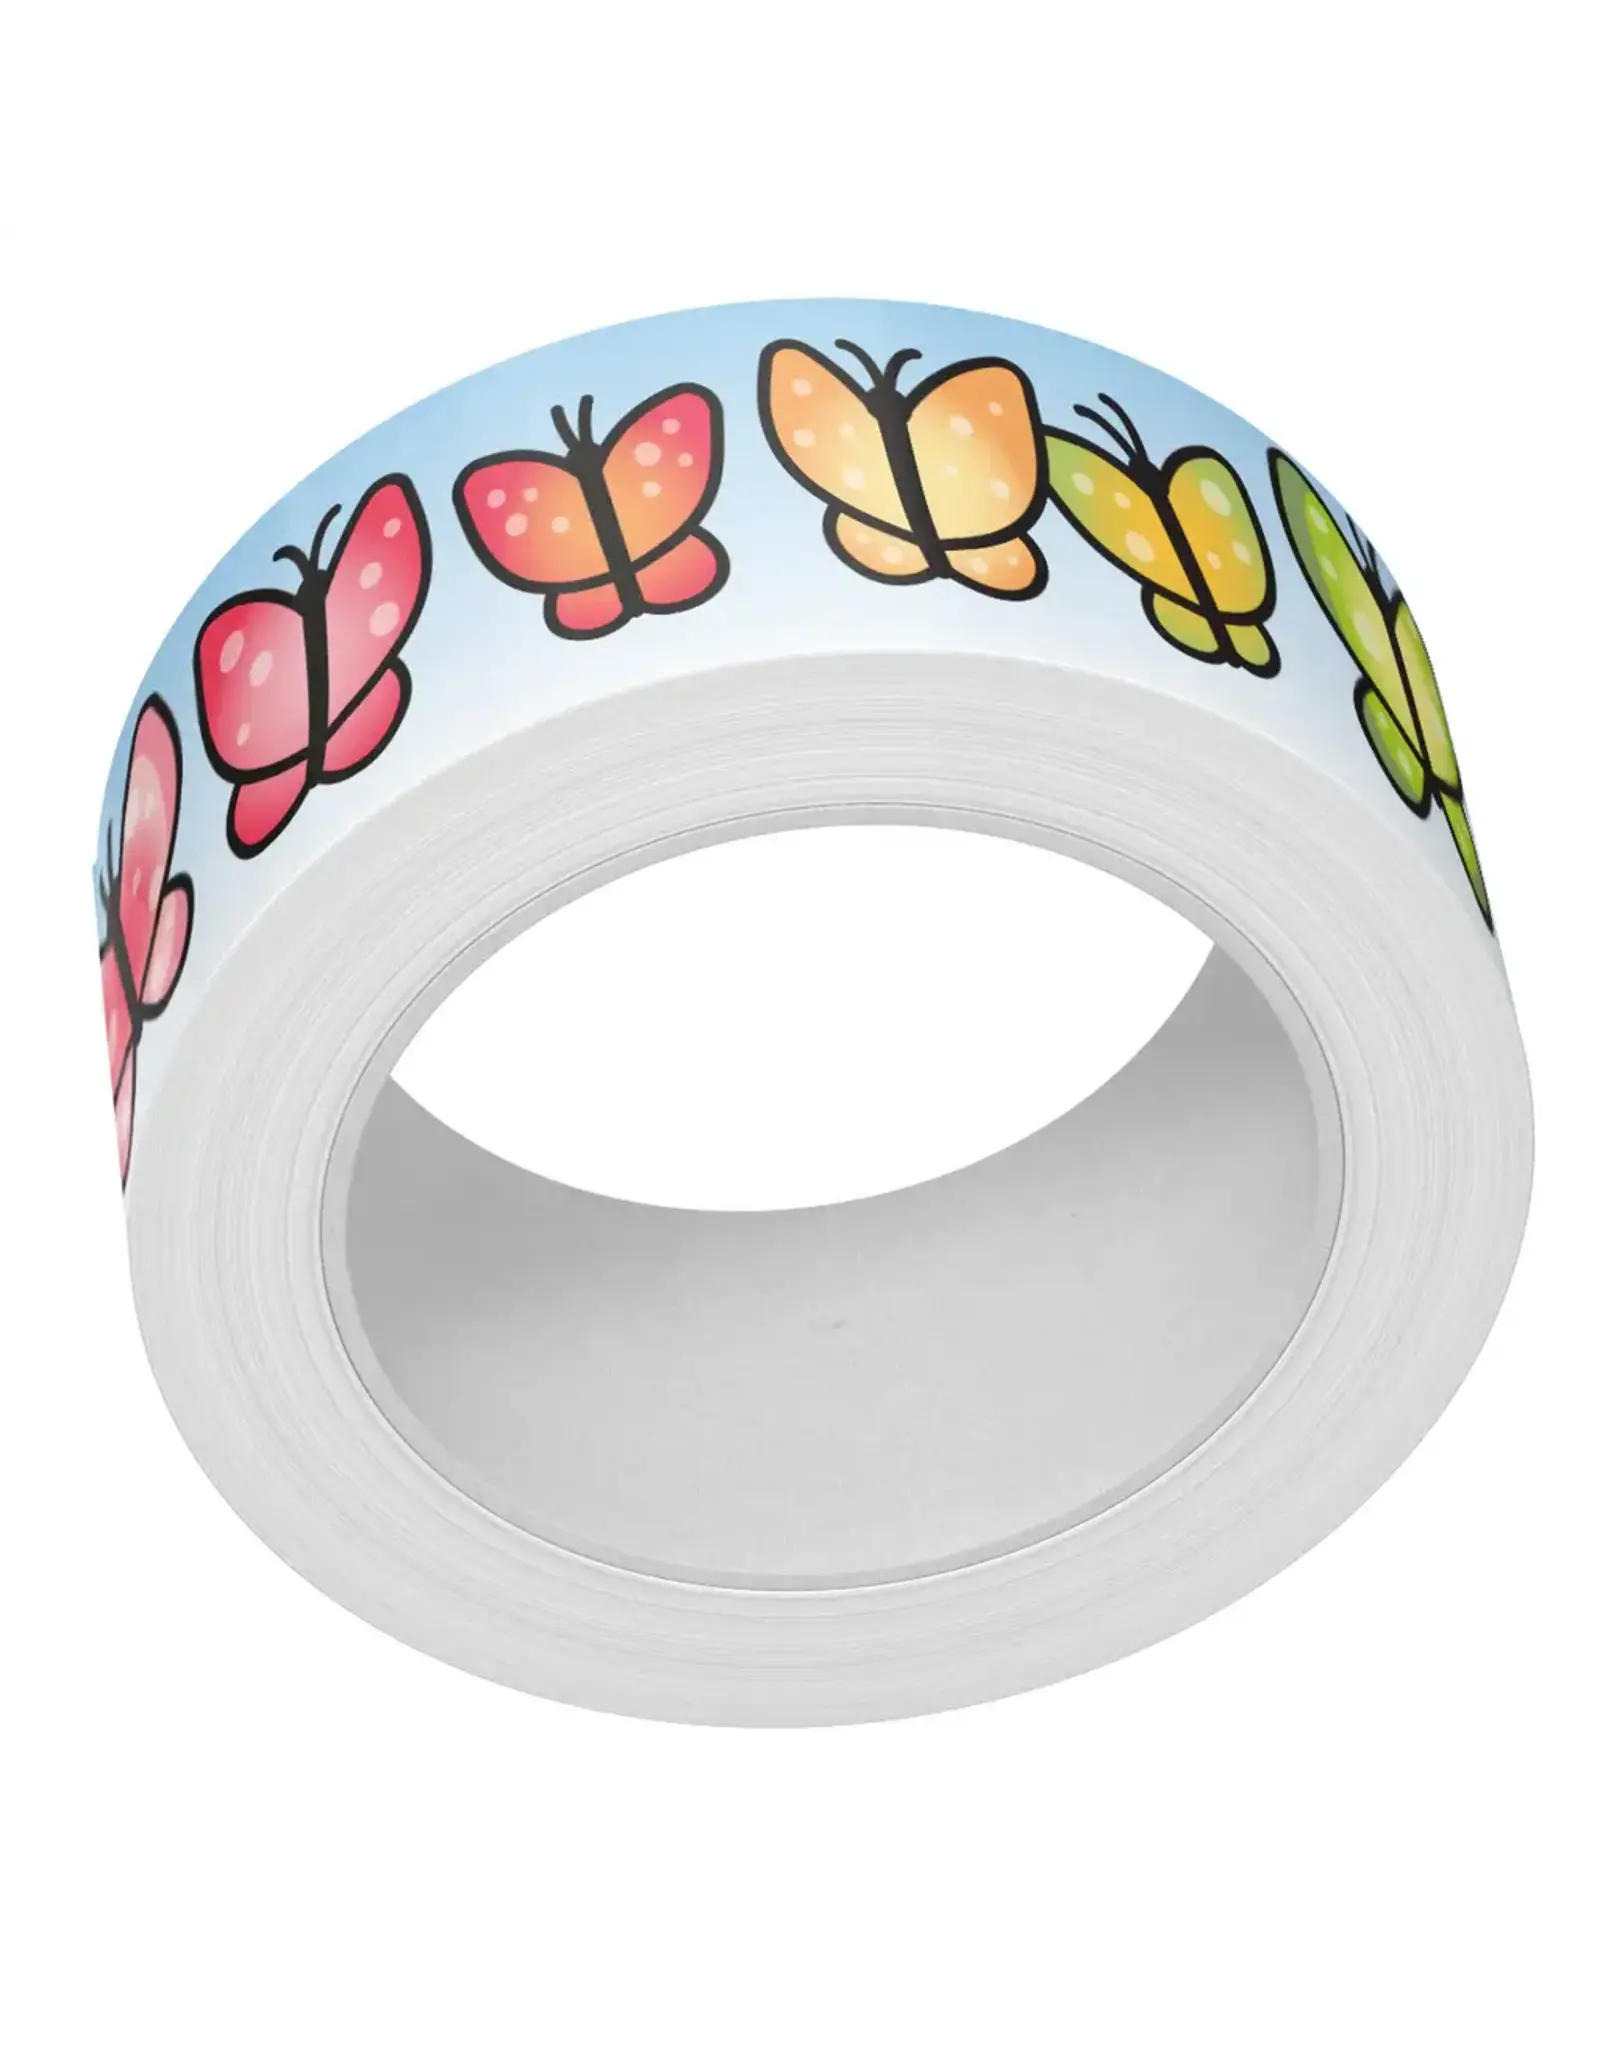 LAWN FAWN LAWN FAWN BUTTERFLY KISSES WASHI TAPE